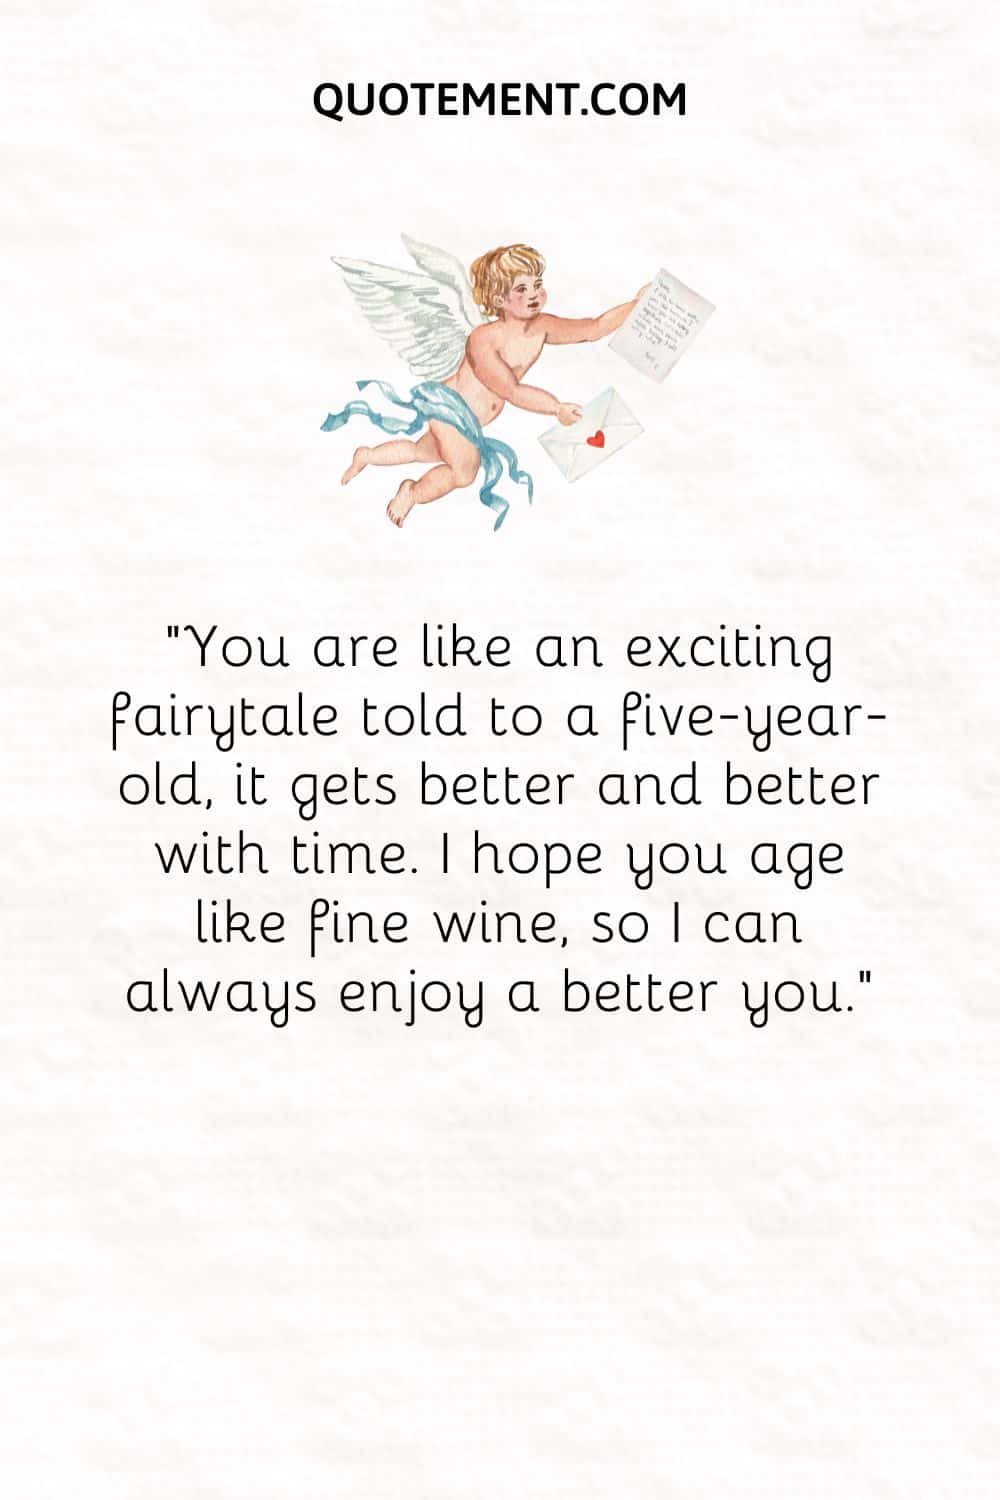 “You are like an exciting fairytale told to a five-year-old, it gets better and better with time. I hope you age like fine wine, so I can always enjoy a better you.”